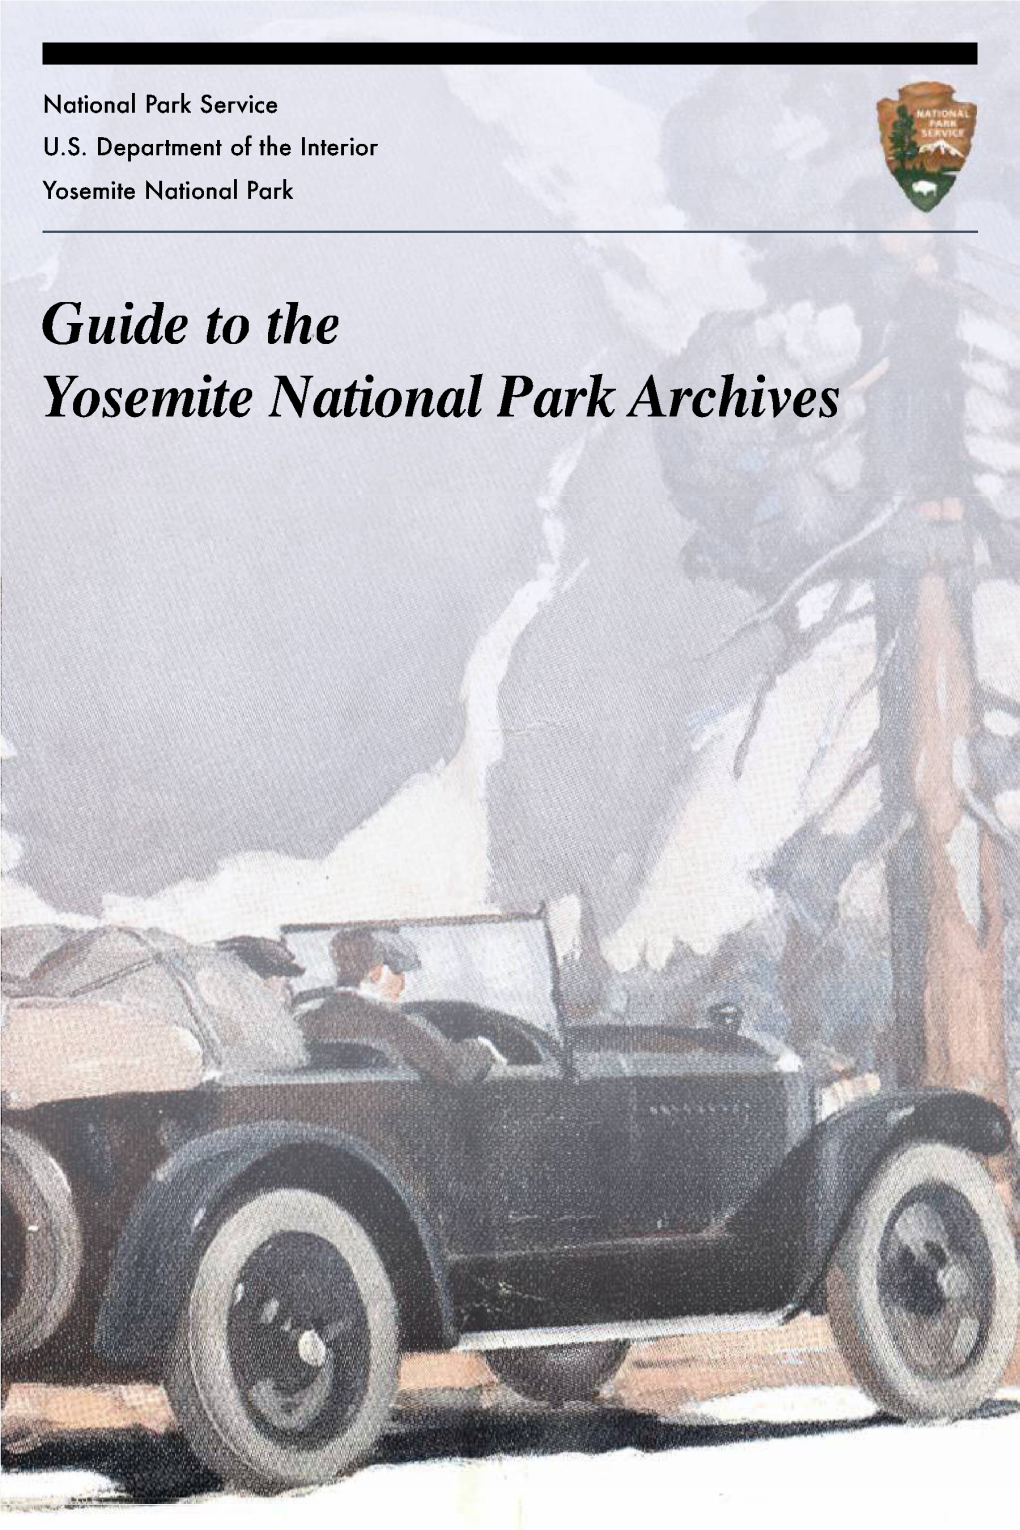 Guide to the Yosemite National Park Archives